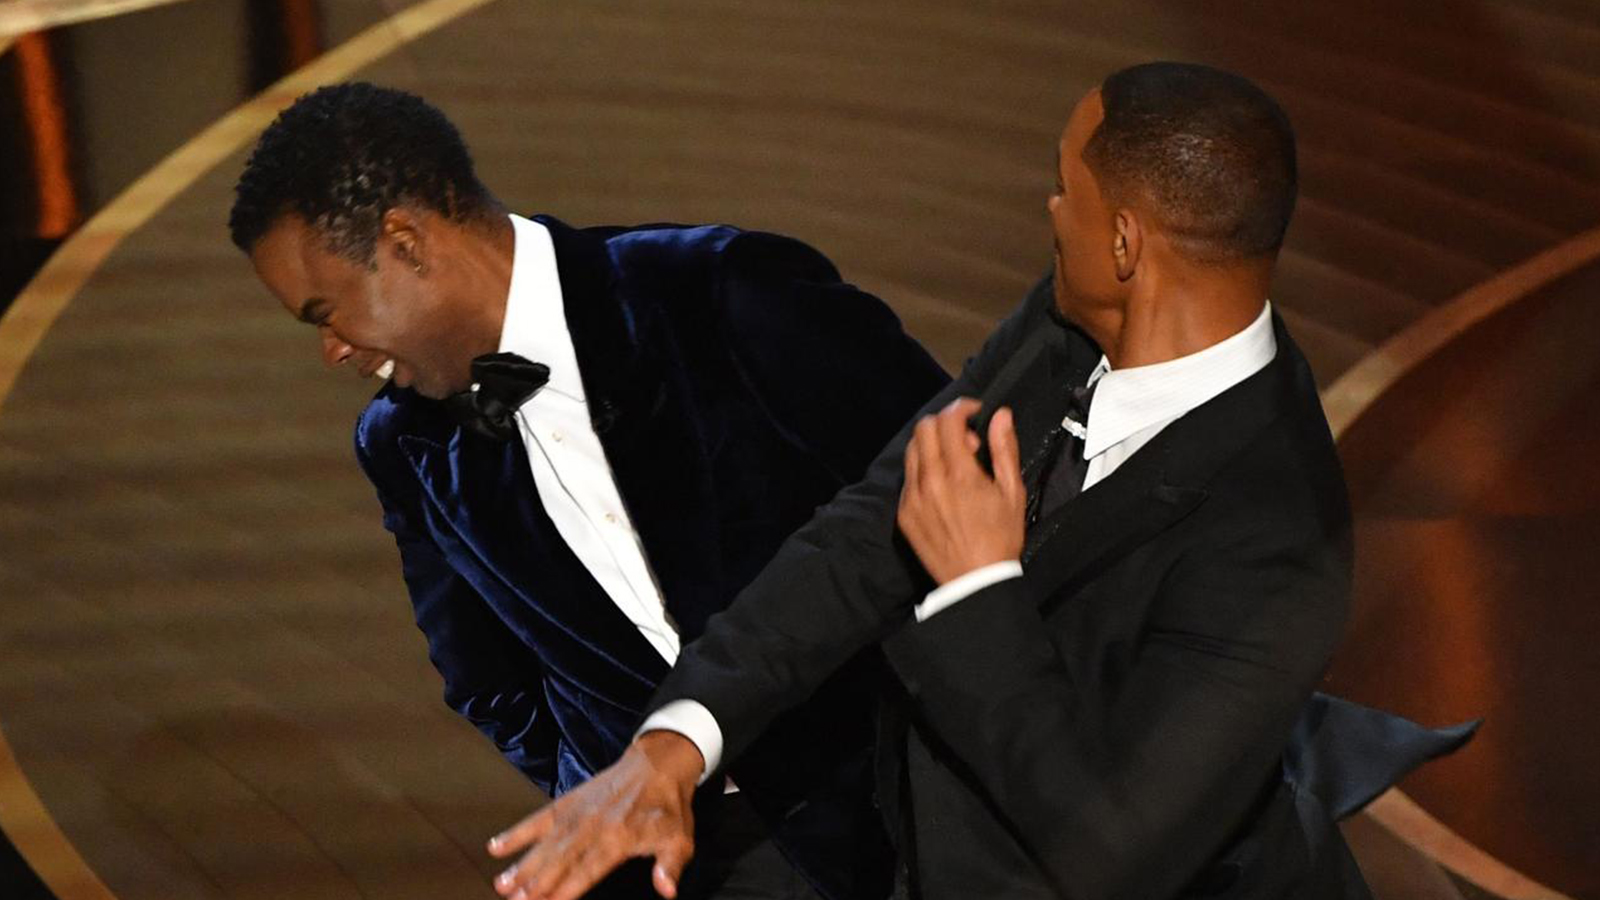 The One Winner In The Will Smith vs. Chris Rock ‘Smackdown’